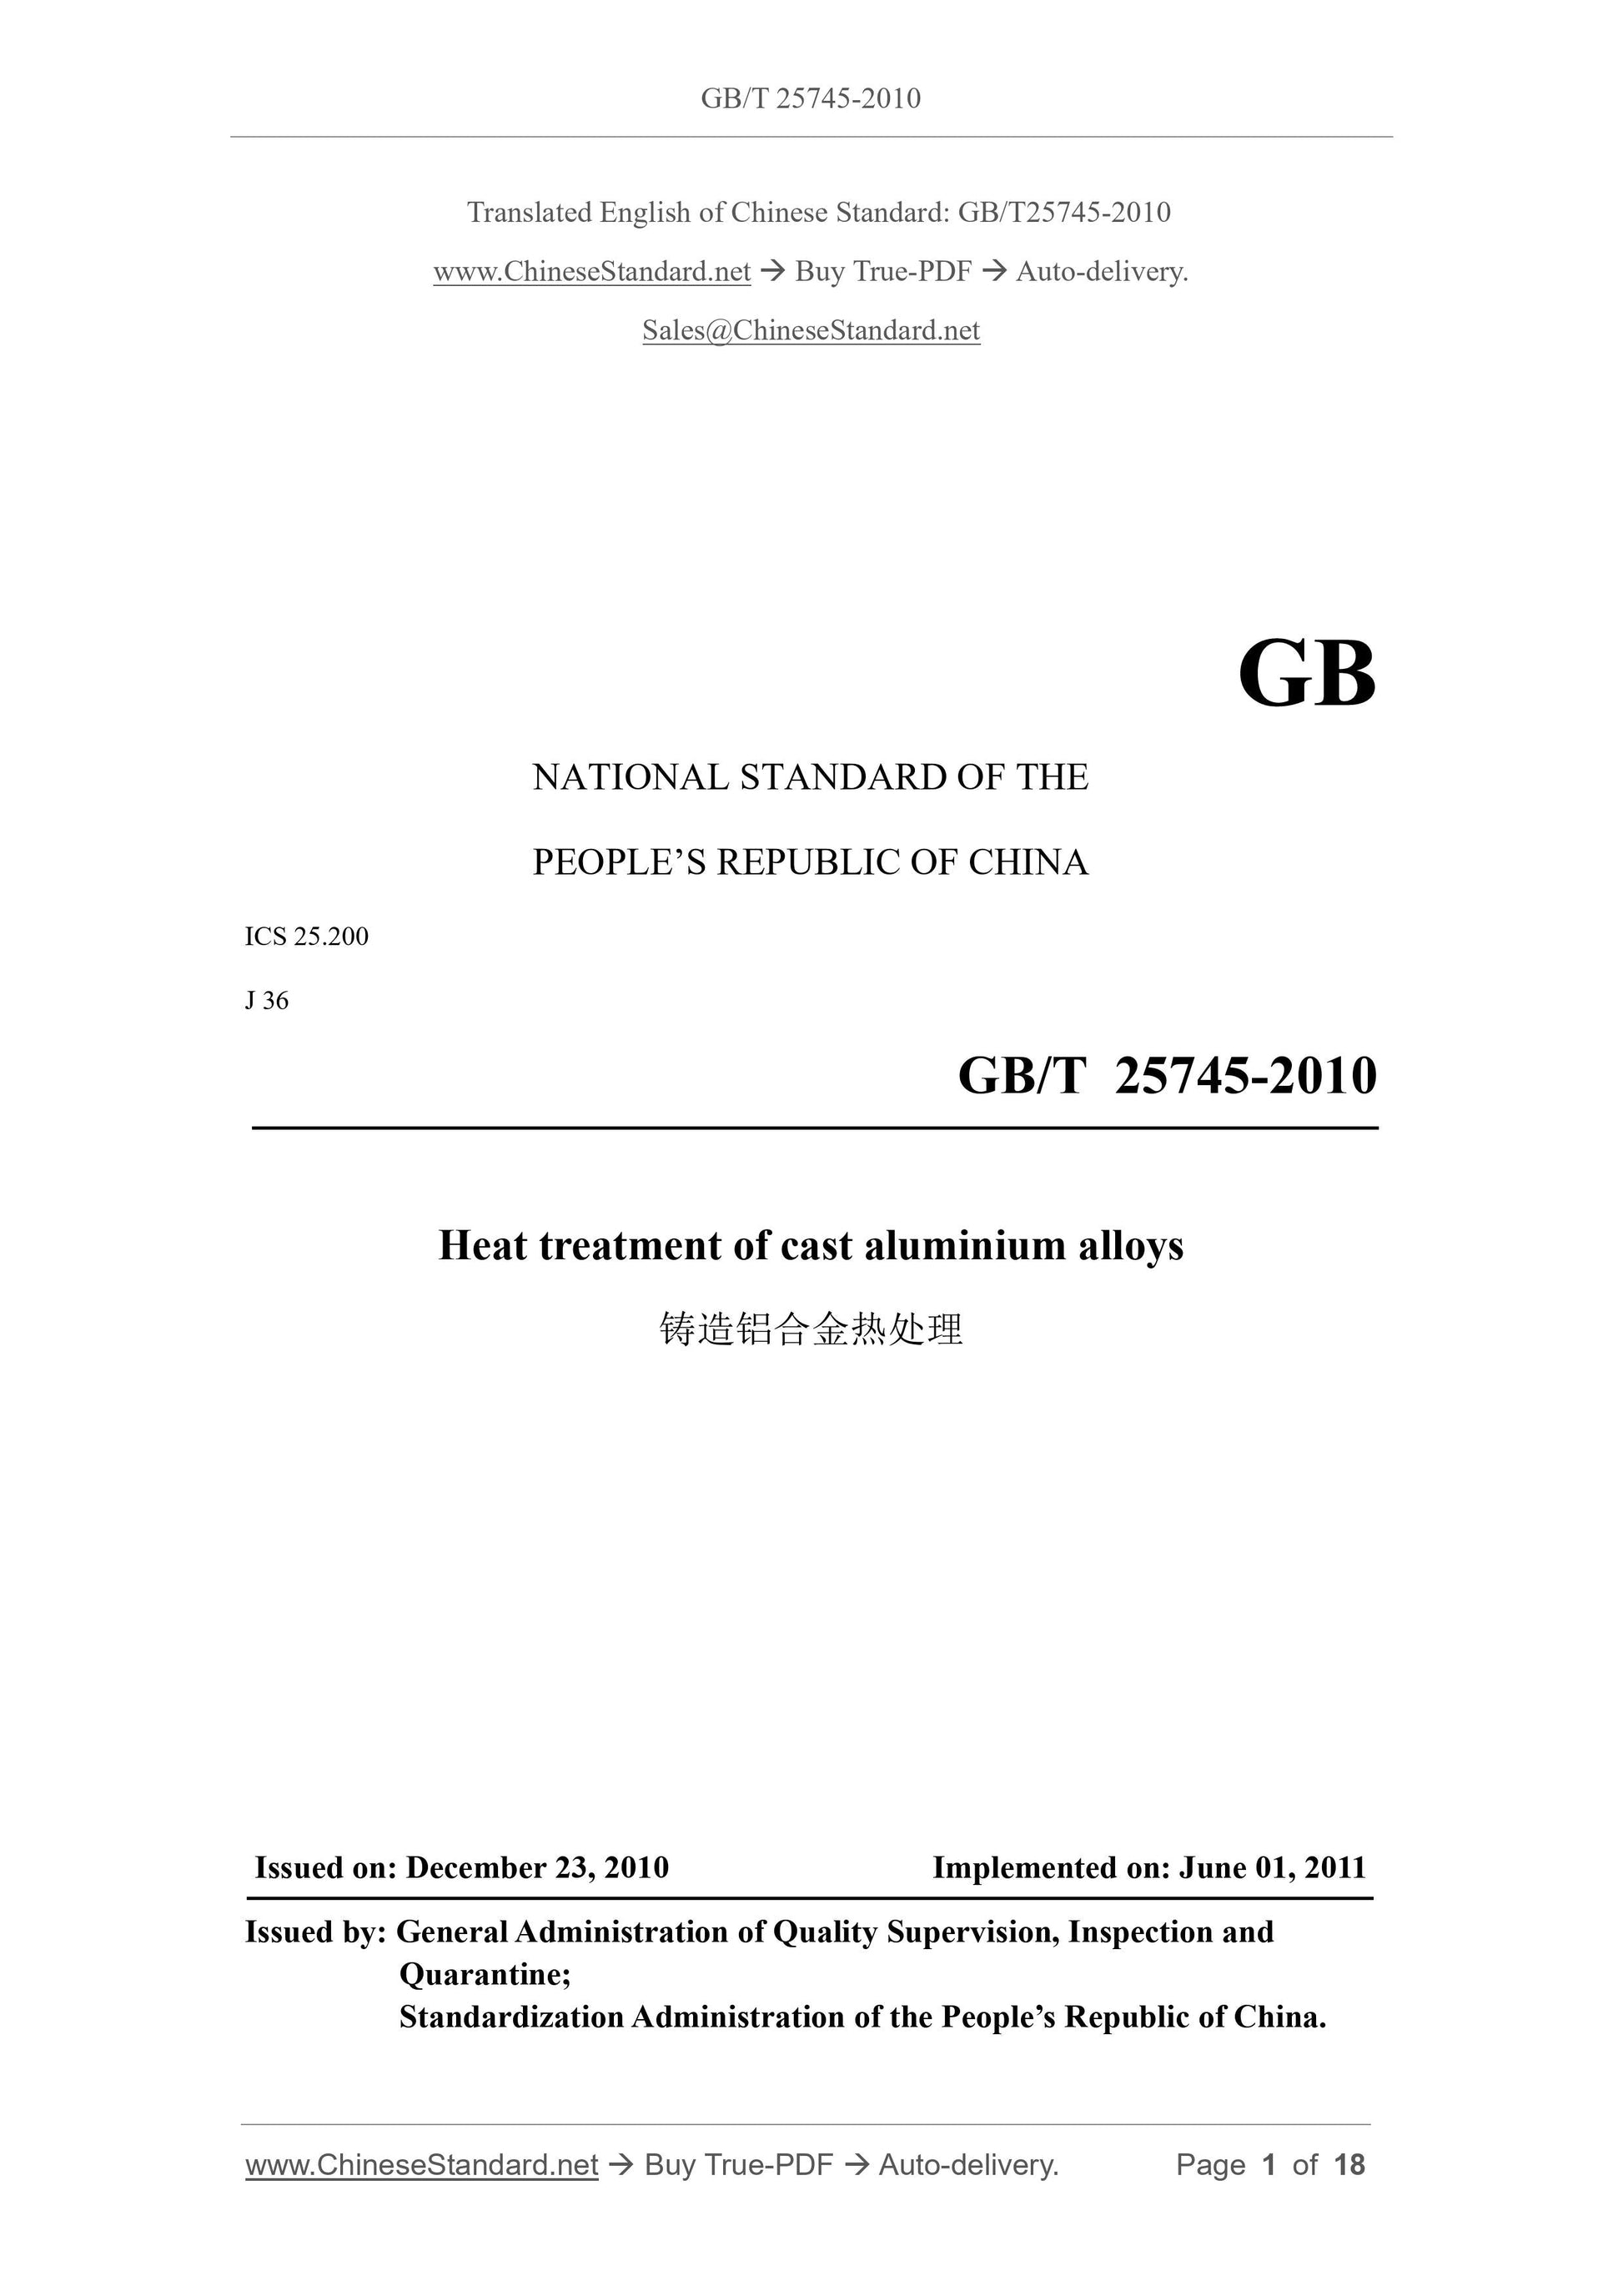 GB/T 25745-2010 Page 1